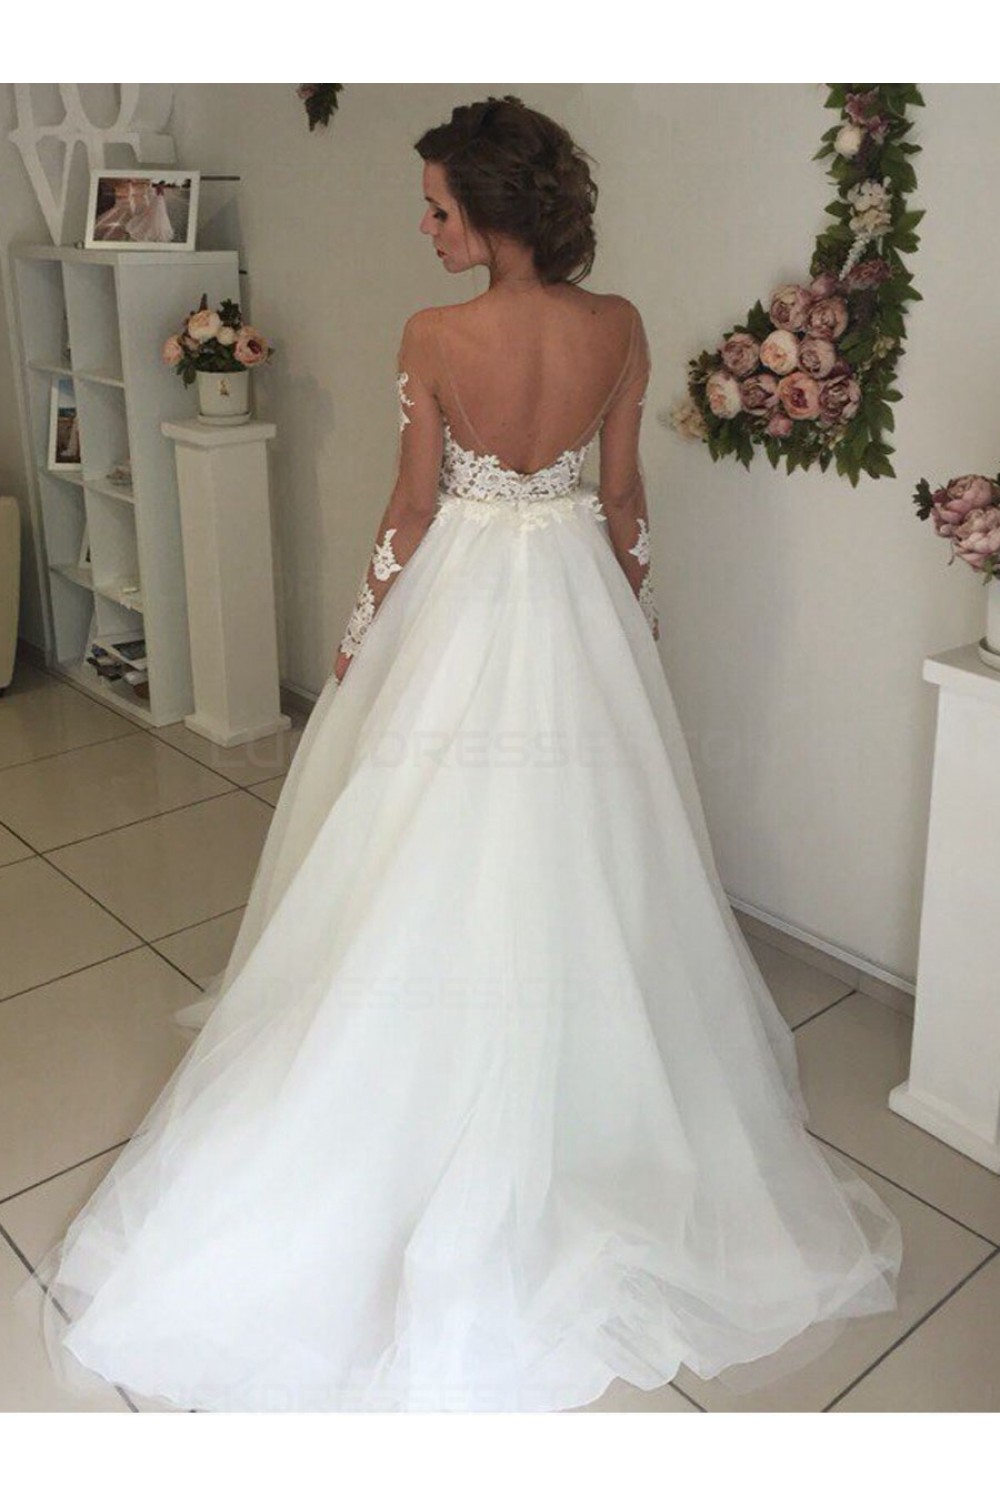  Lace Wedding Dress With Illusion Neckline of the decade Learn more here 